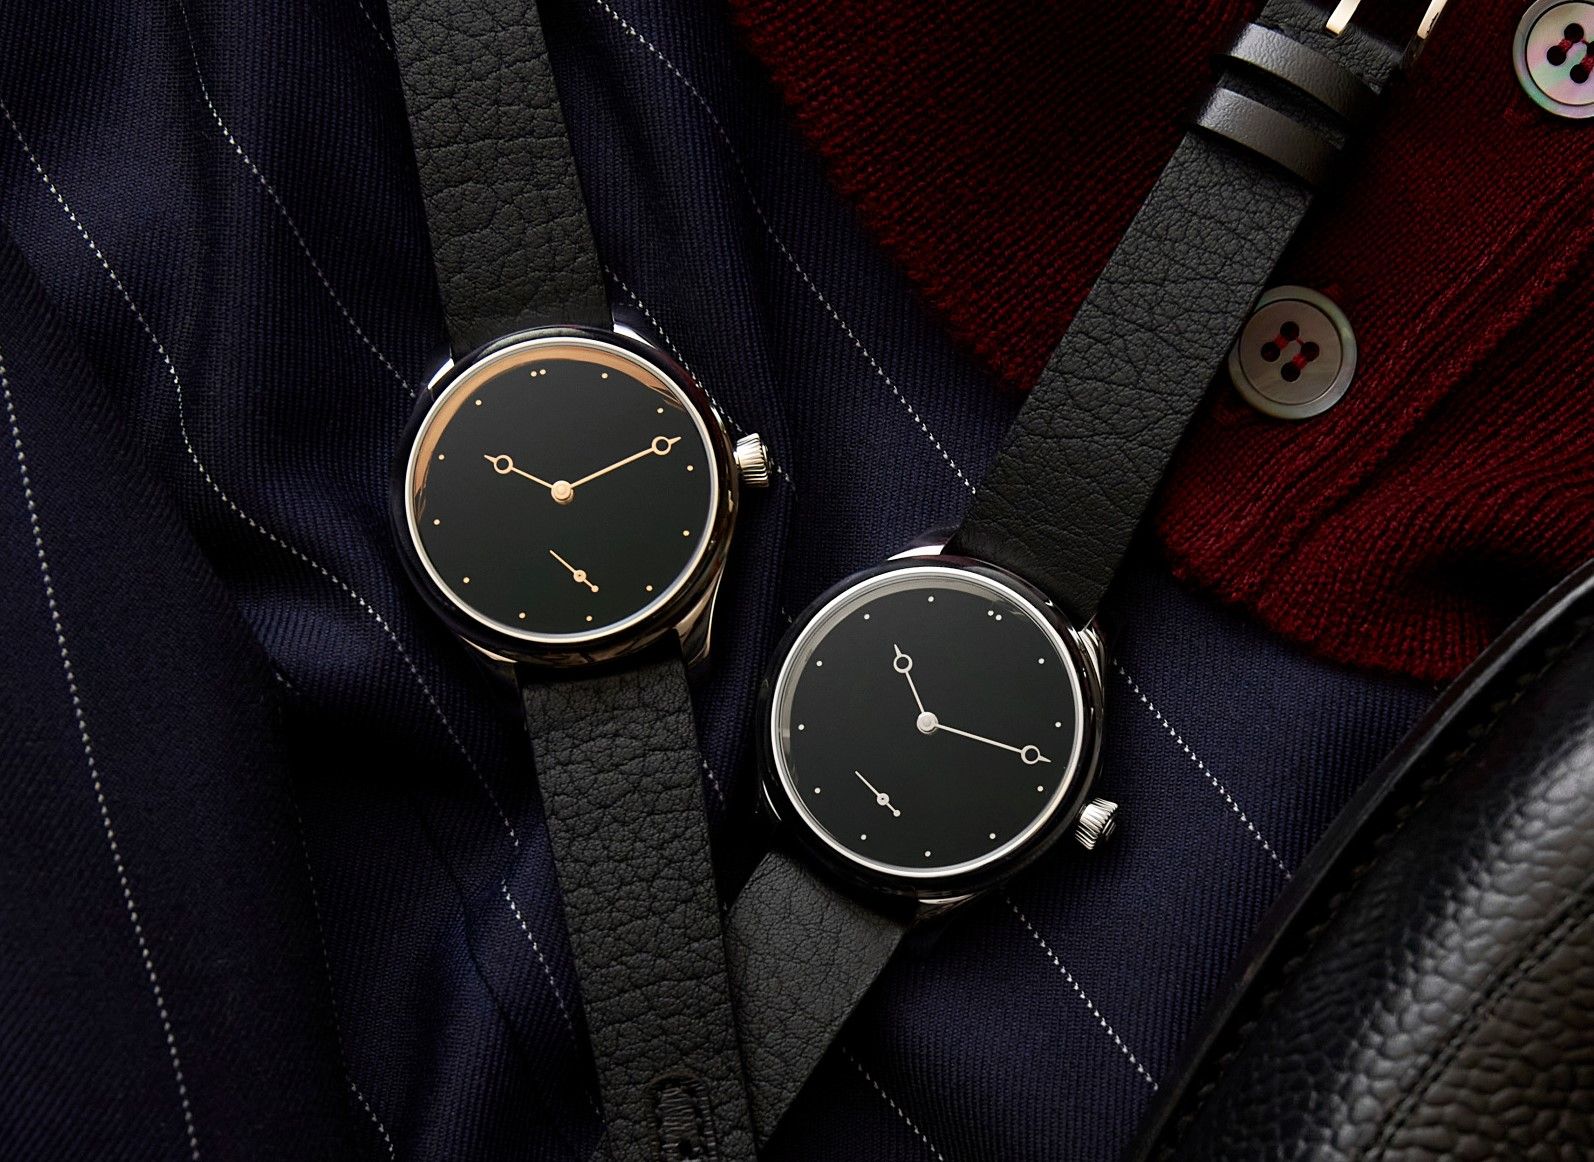 H. Moser & Cie. The Endeavour Small Seconds Total Eclipse